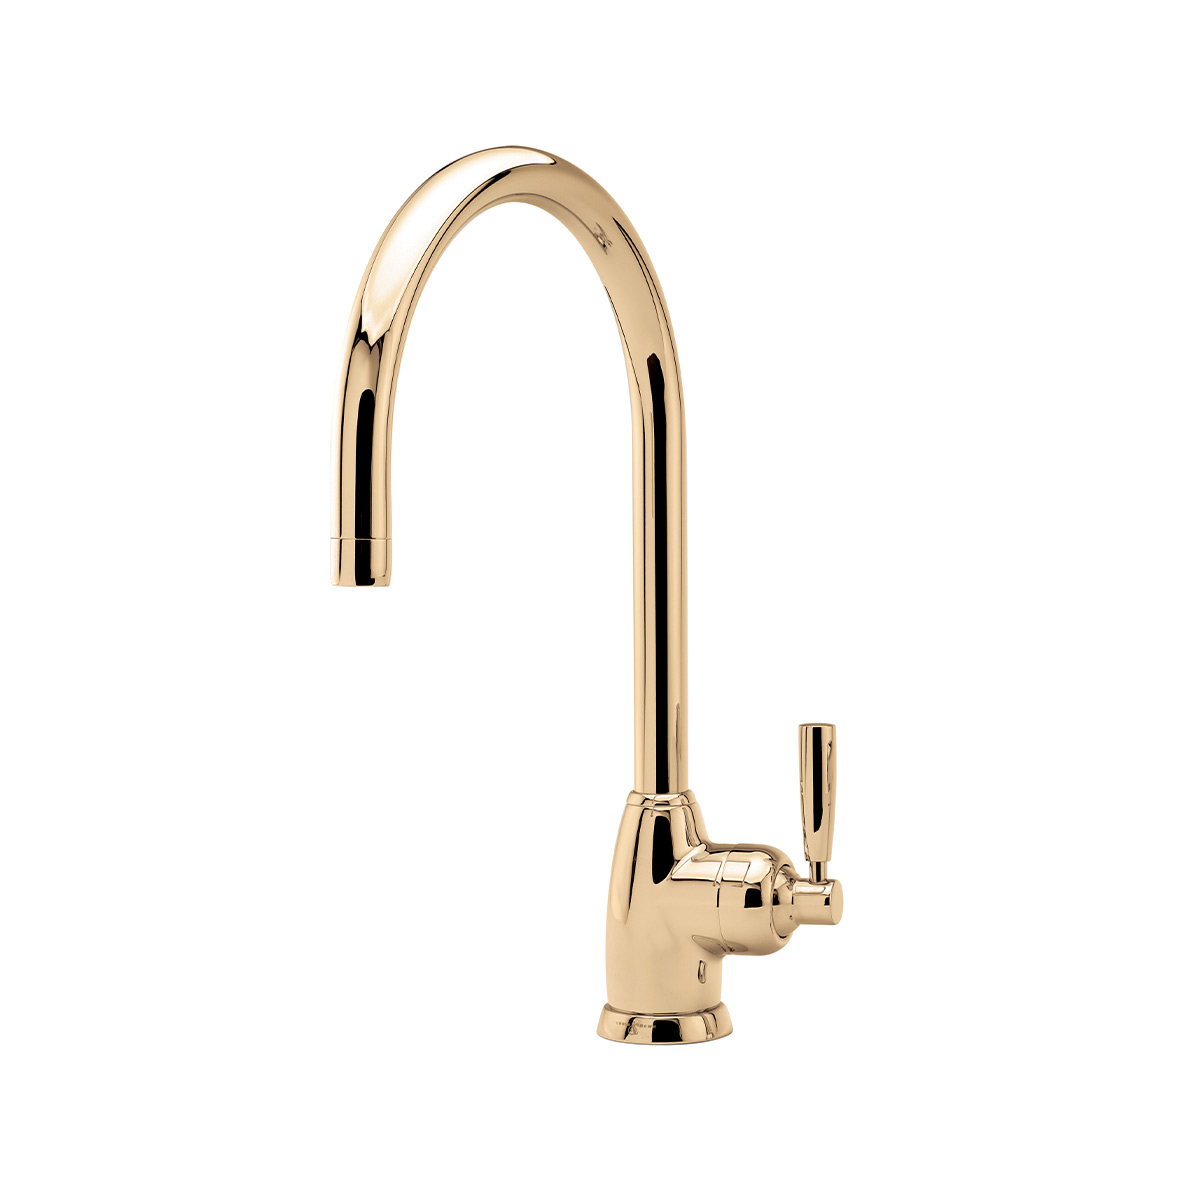 Shaws by Perrin & Rowe Roeburn kitchen mixer in Polished Brass. Mimas style monobloc kitchen tap AUSH.4841. Distributed in Australia by Luxe by Design, Brisbane.